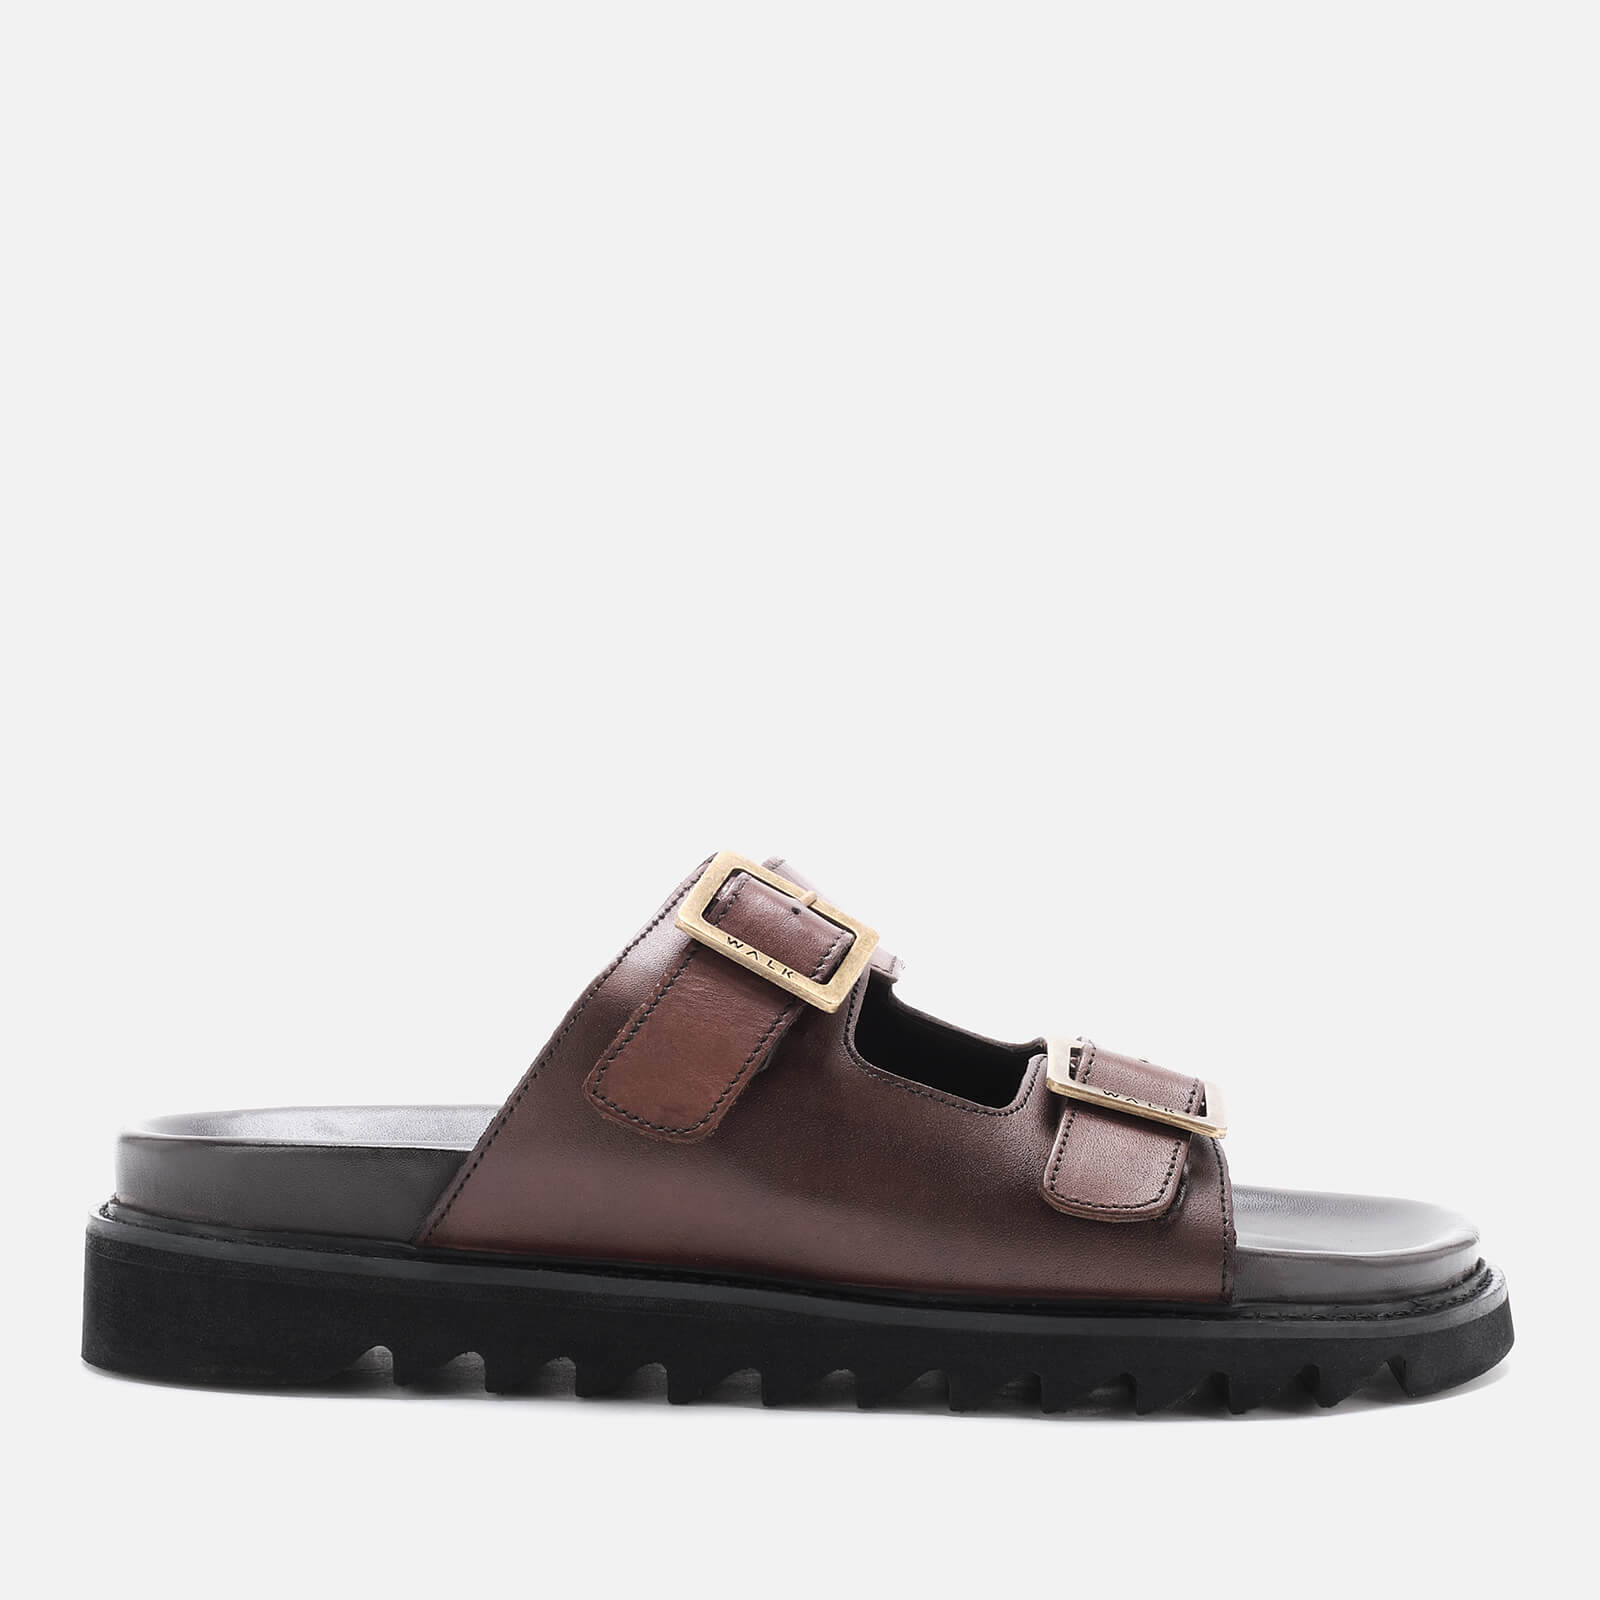 Walk London Men’s Jaws Leather Double Strap Sandals - Brown